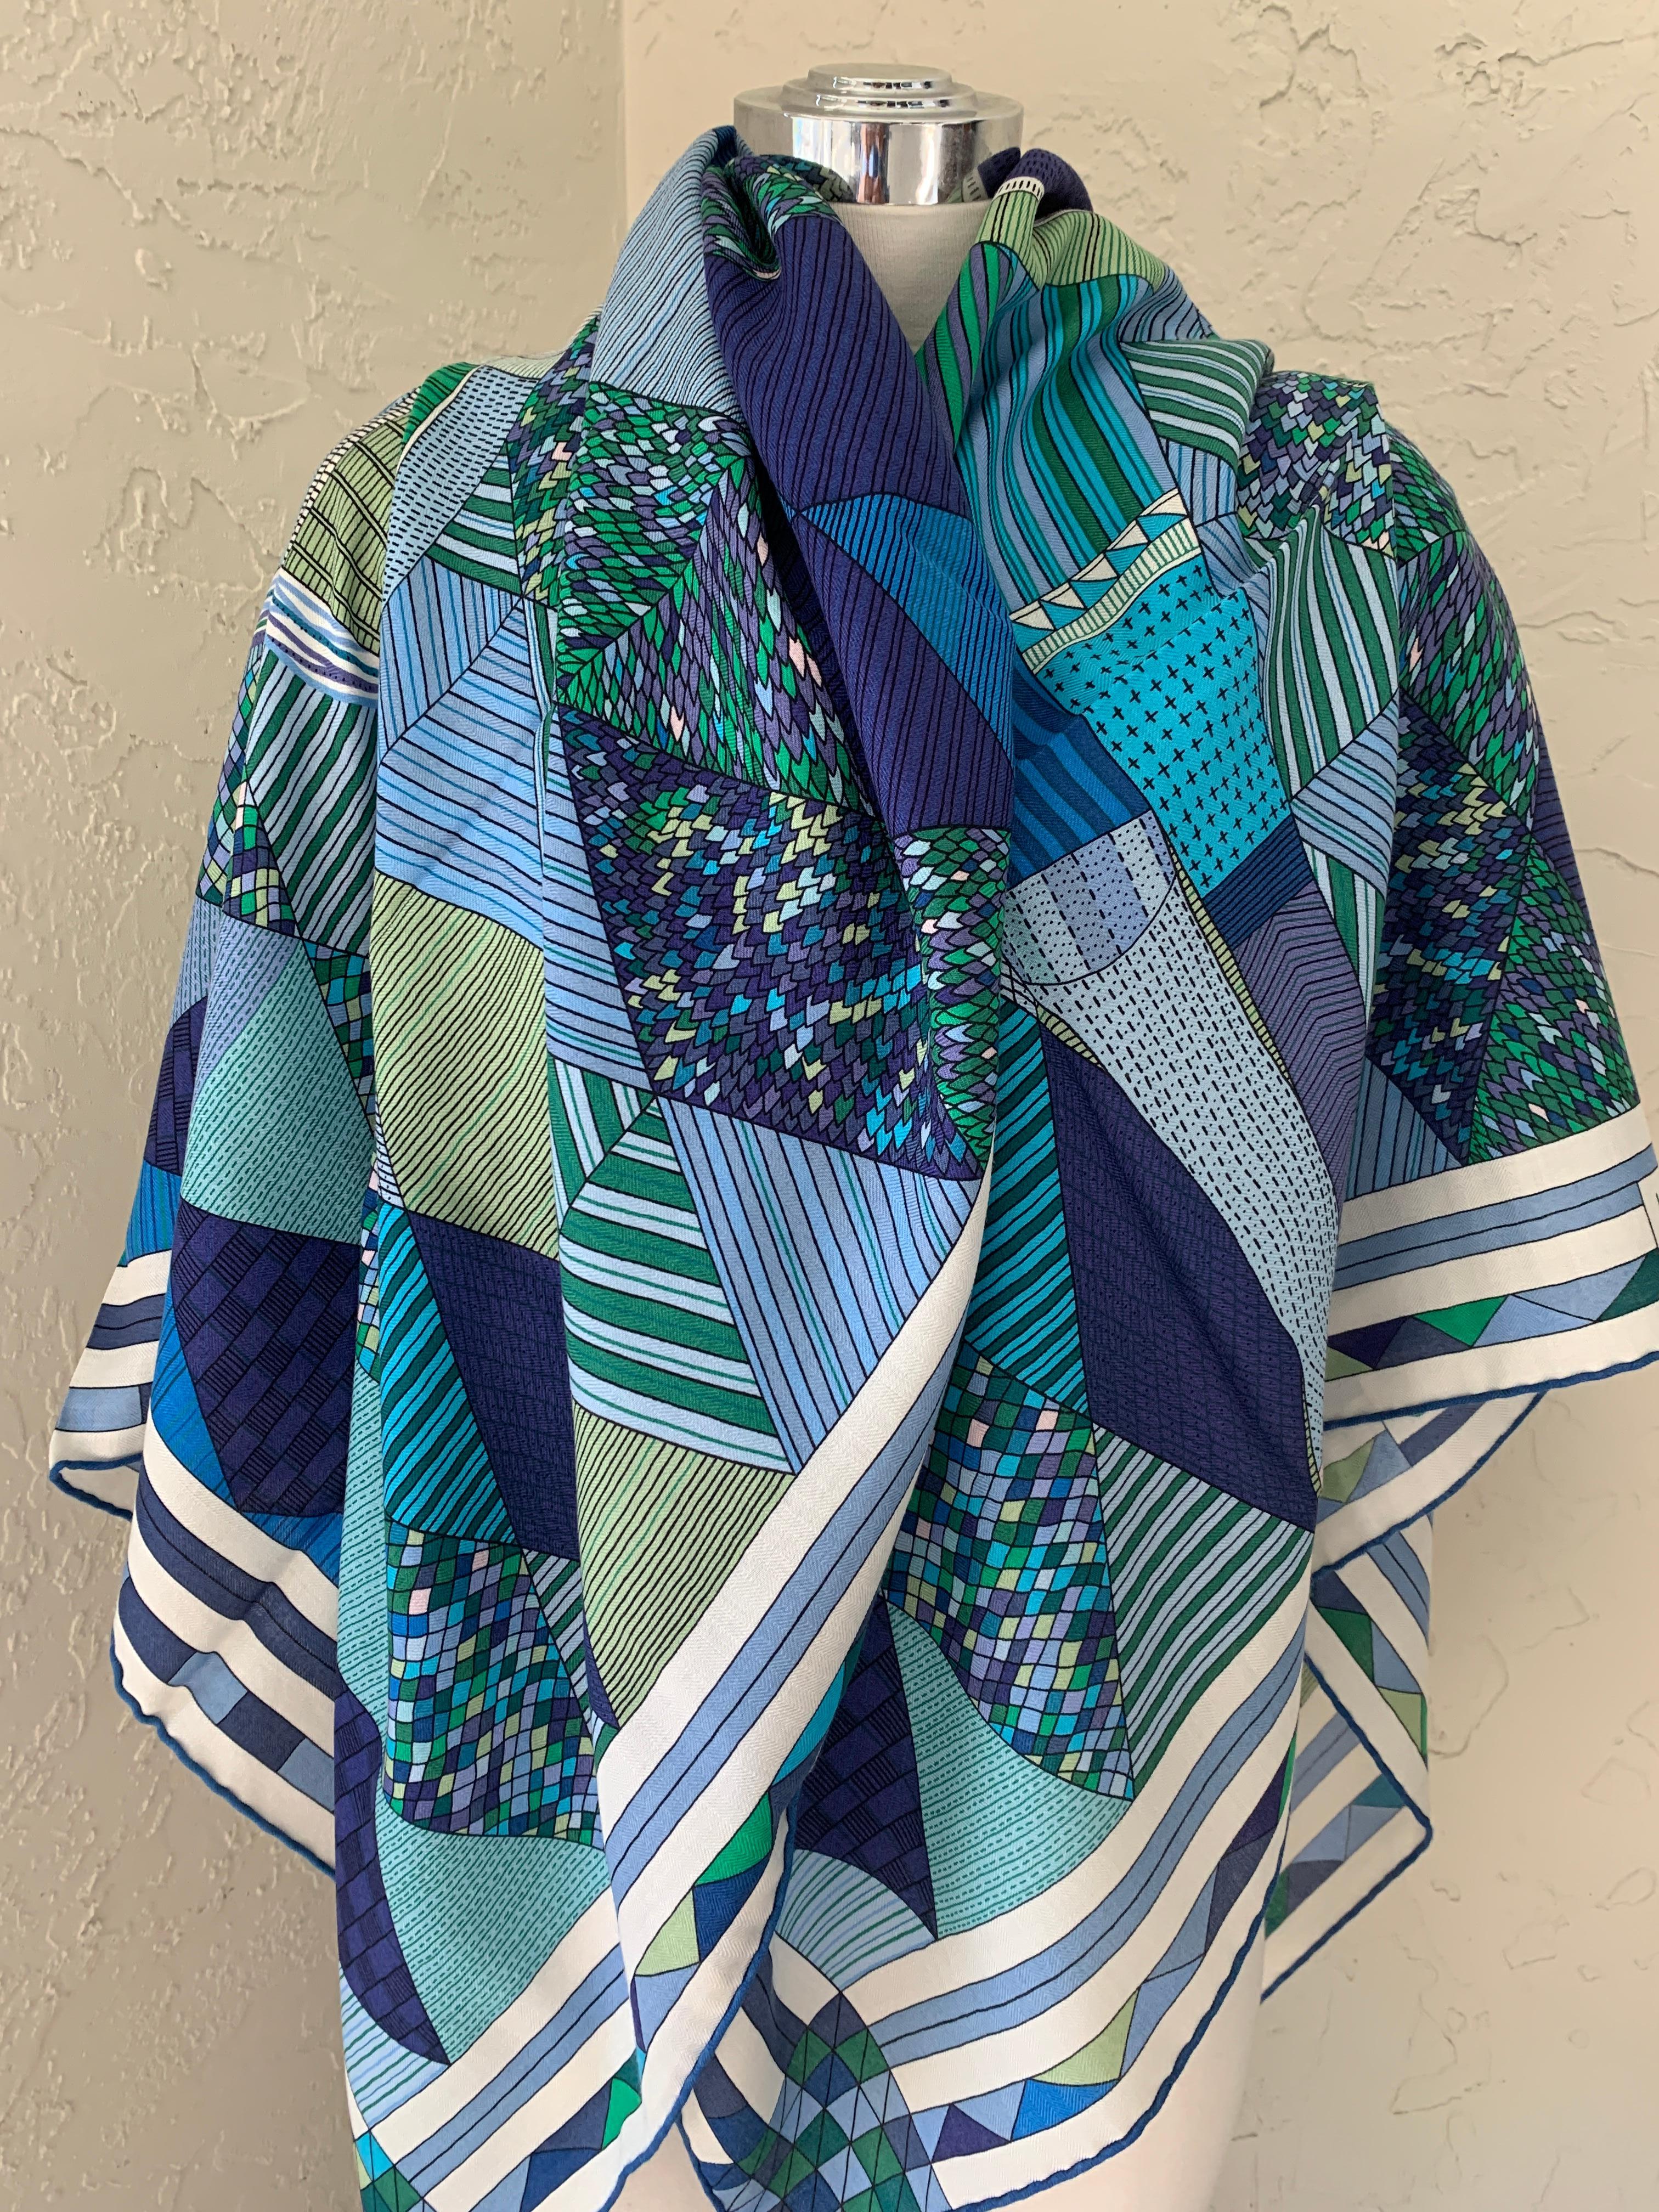 Hermes Cashmere Shawl/Scarf
Patchwork Horse Shawl
Designed by Nigel Peake
 
 
Cashmere shawl large 140cmShawl in cashmere and silk with hand-rolled edges (70% cashmere, 30 % silk).

Printed on our iconic cashmere and silk material, this giant scarf